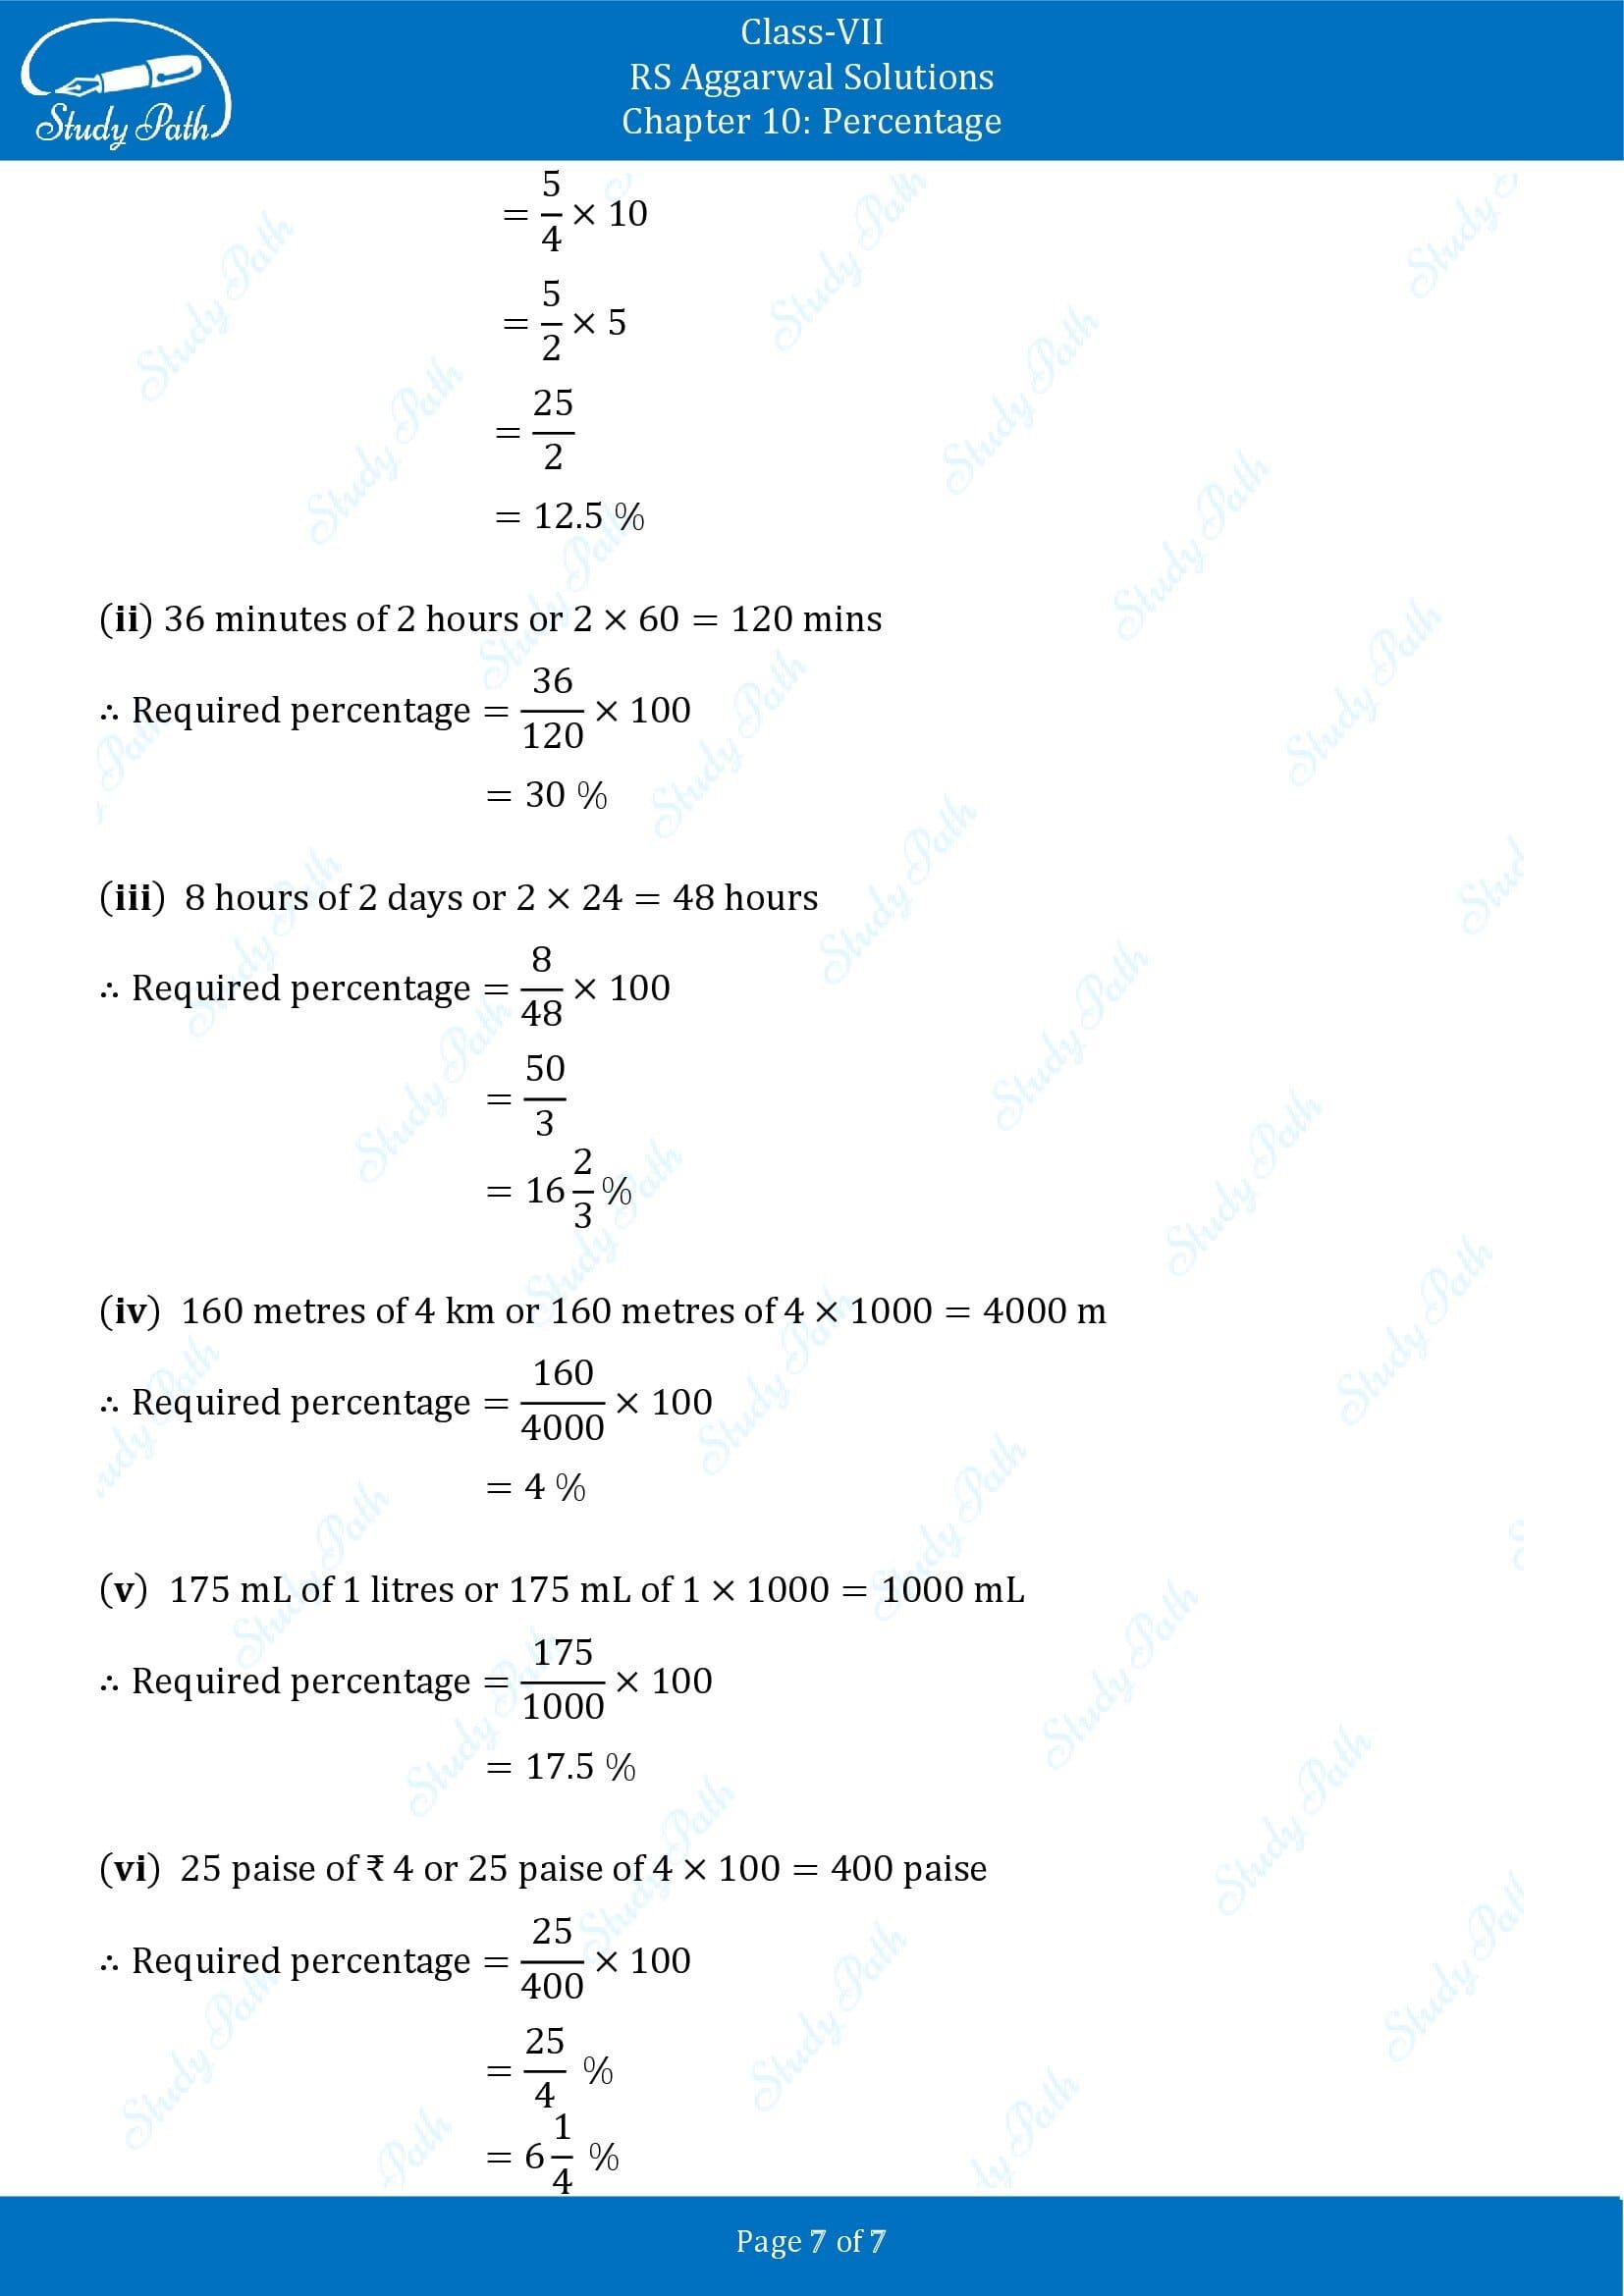 RS Aggarwal Solutions Class 7 Chapter 10 Percentage Exercise 10A 00007